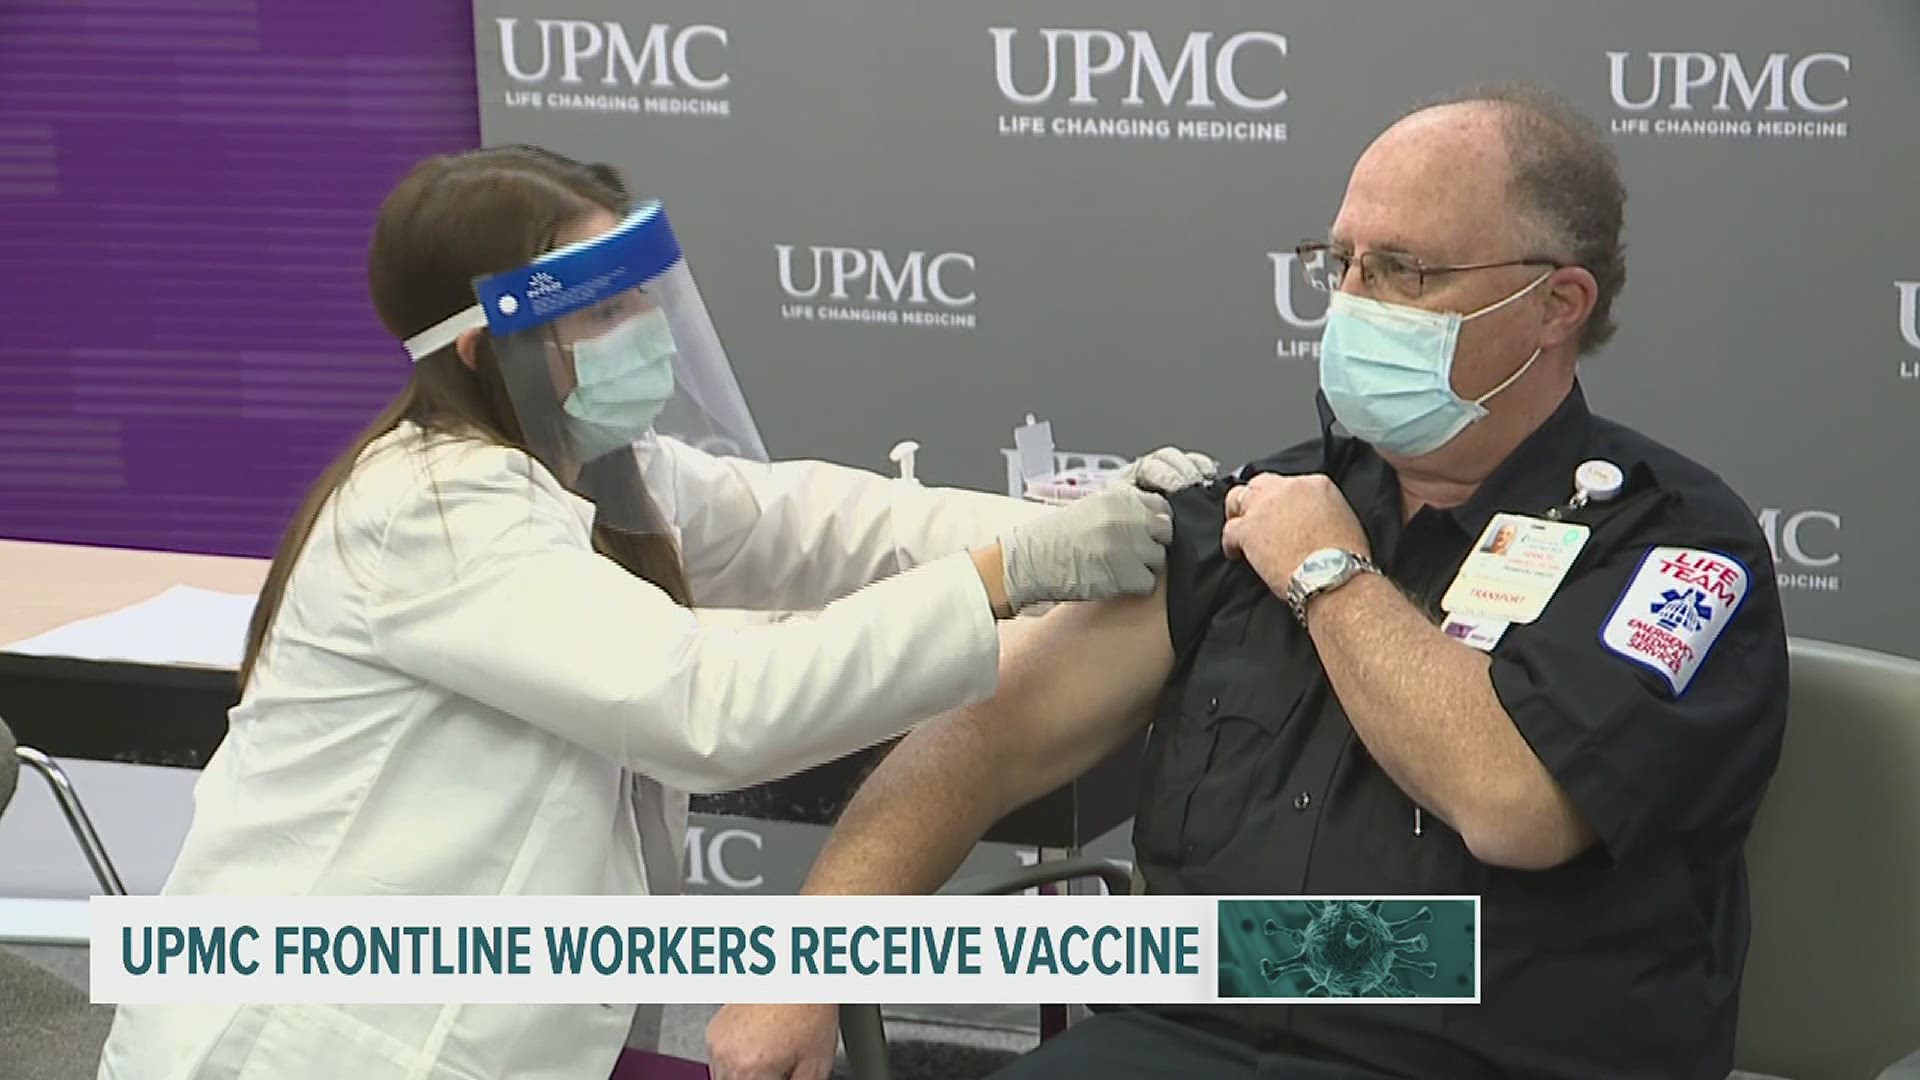 FOX43 looks into what happens after workers receive the vaccine, the time it can take for prevention, and if there are any potential side effects.